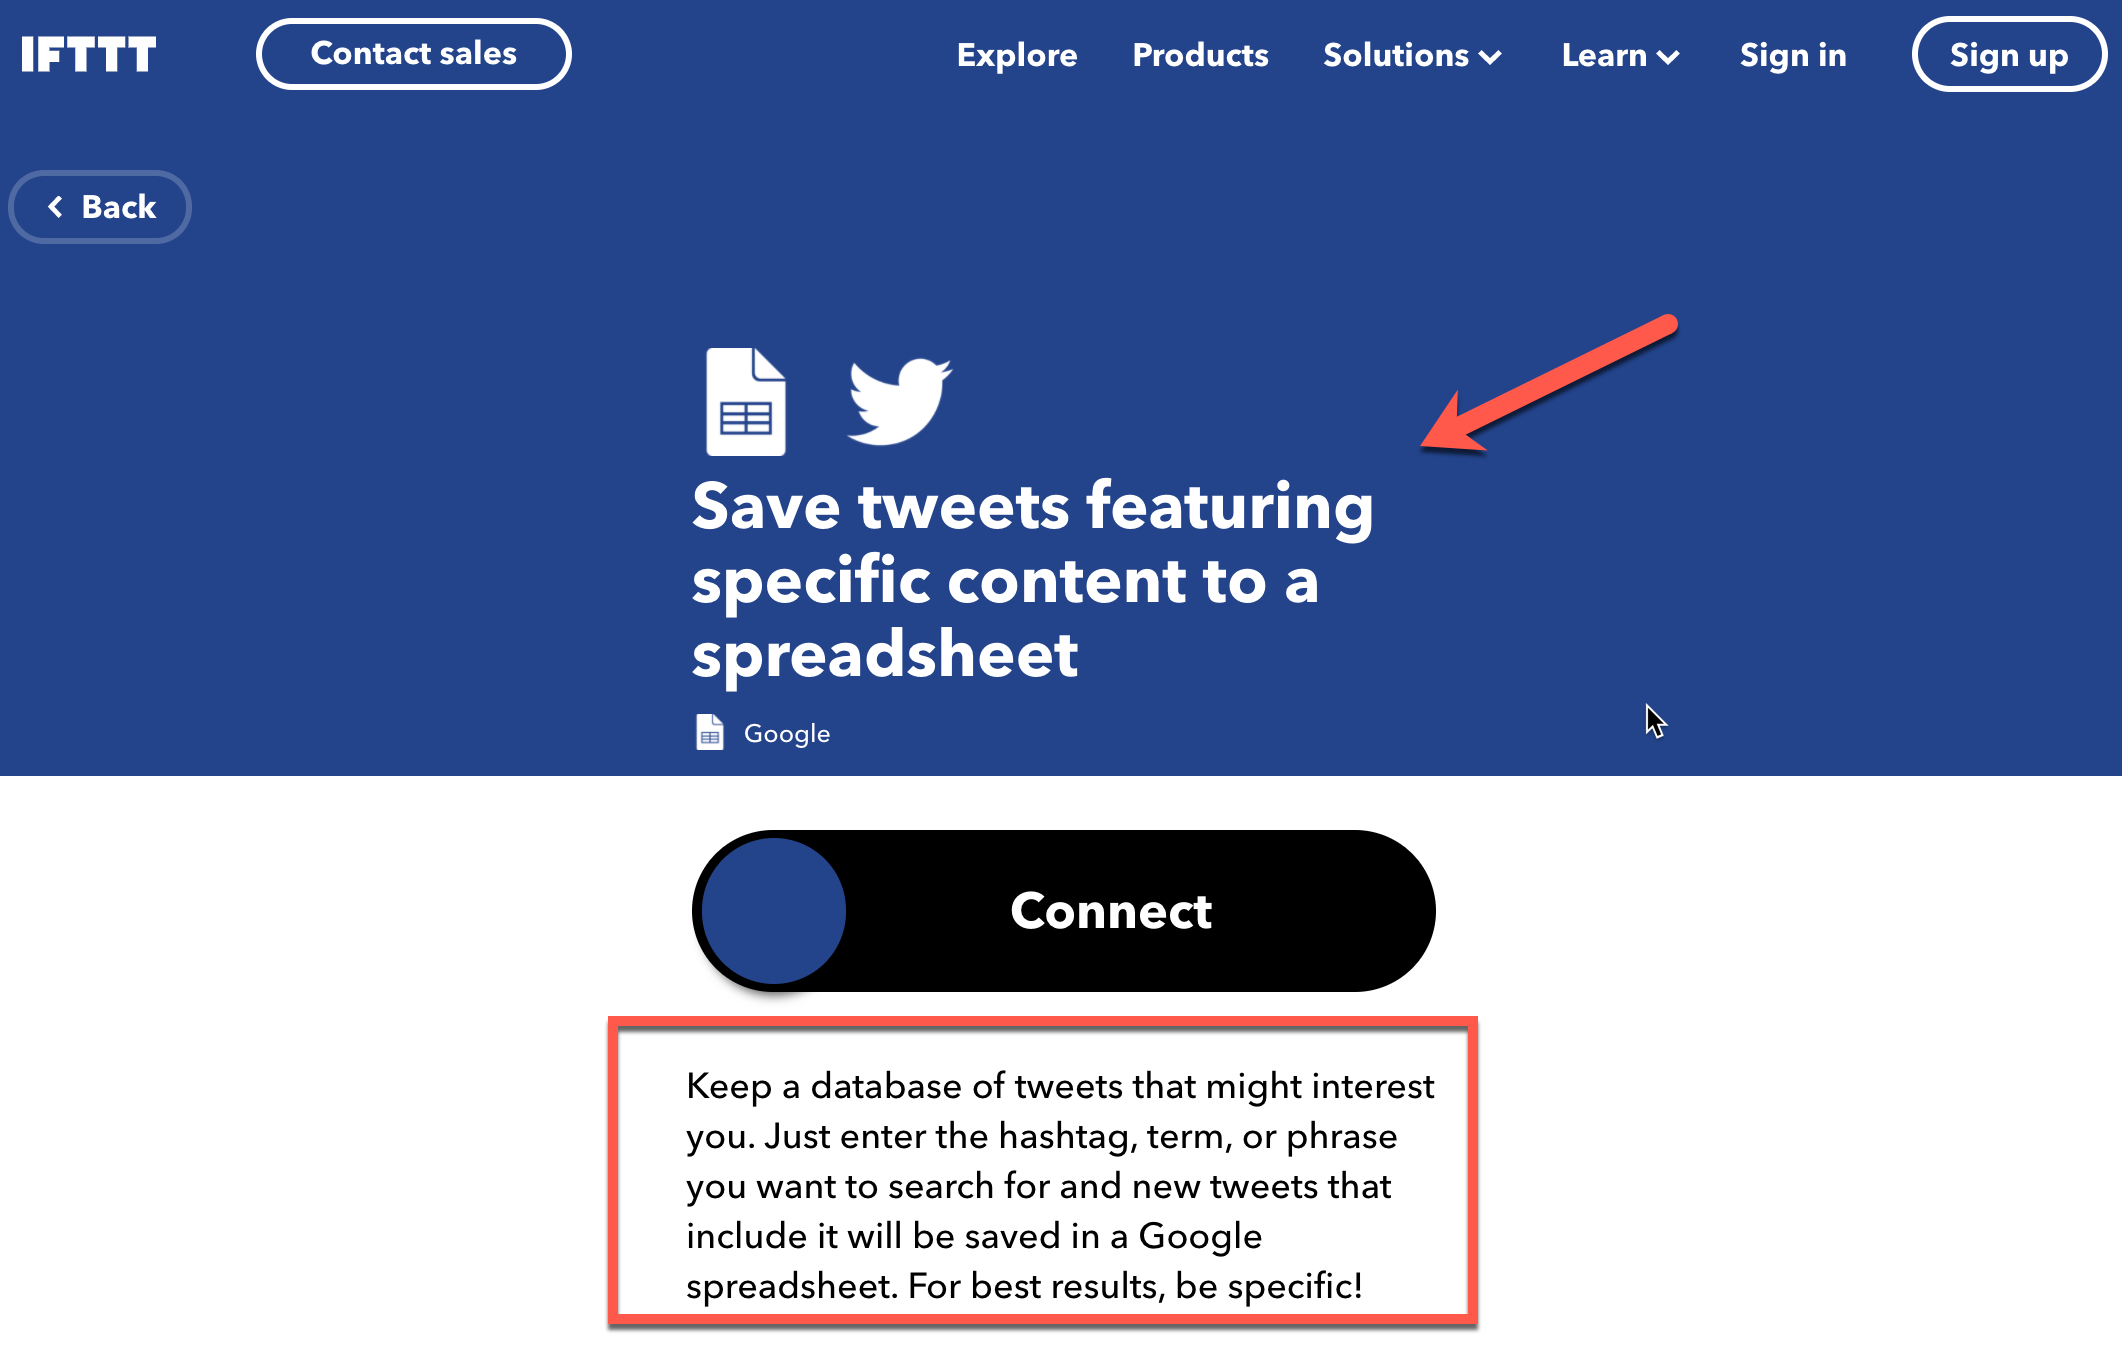 IFTTT for purchase intent